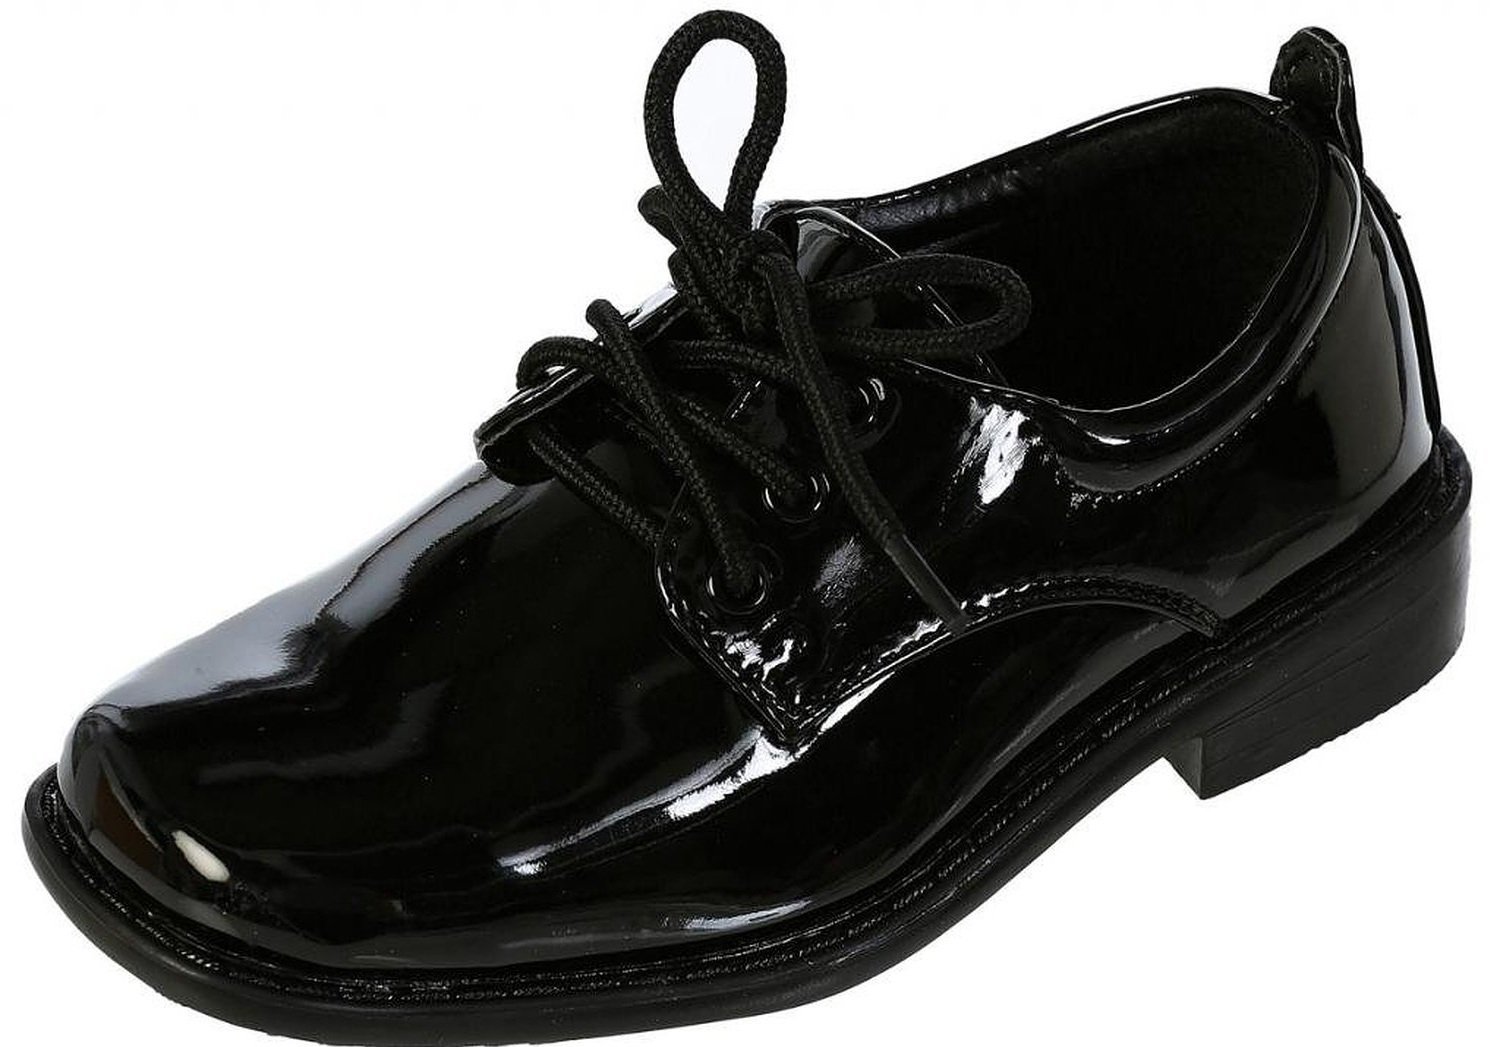 Boys Square Toe Lace Up Oxford Patent Dress Shoes - Available in Black 1 Little Kid